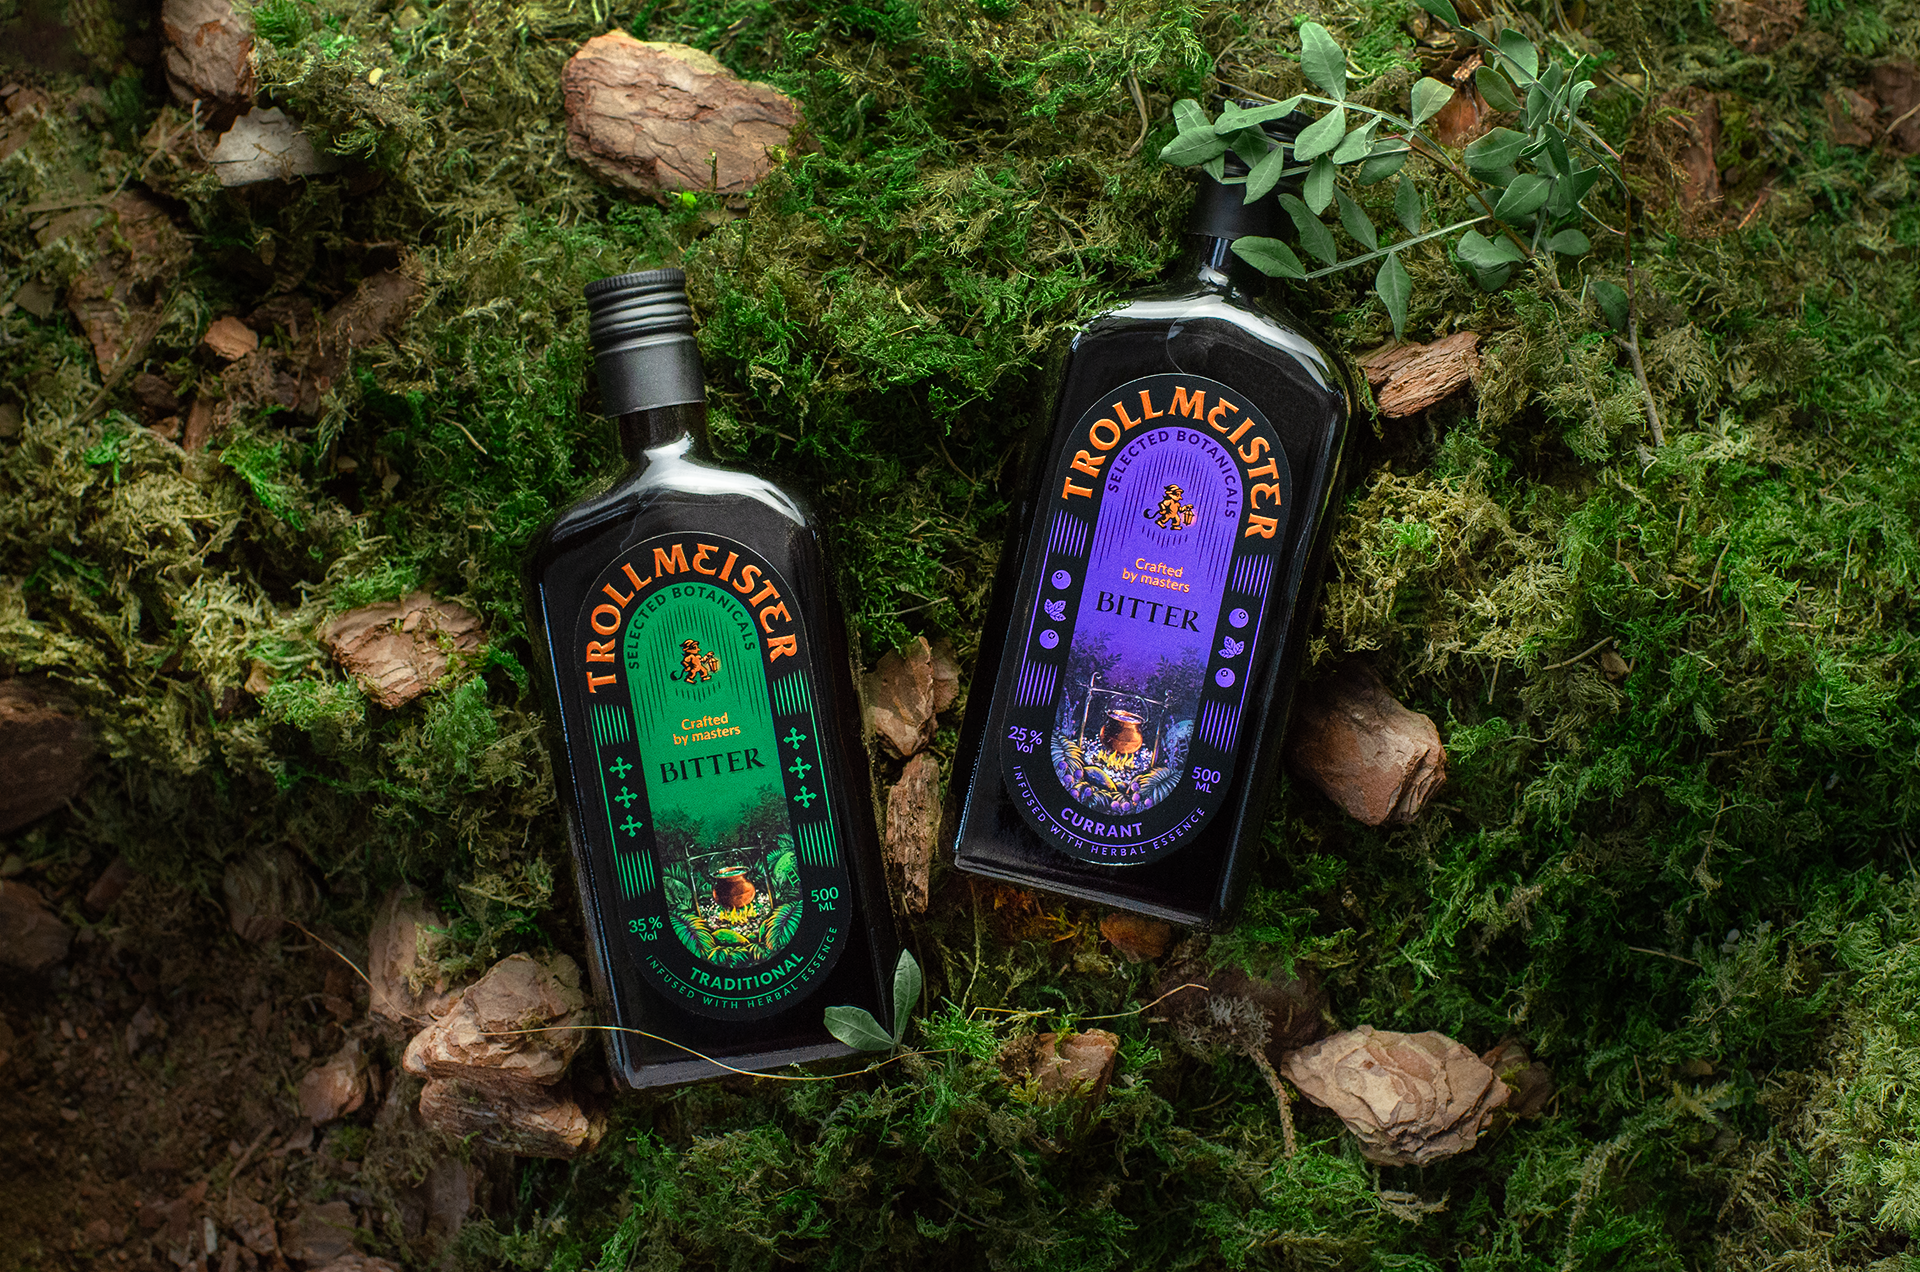 Bitters Get a Dreamy Cottagecore Look in Trollmeister’s Witchy Metallic Bottle Design